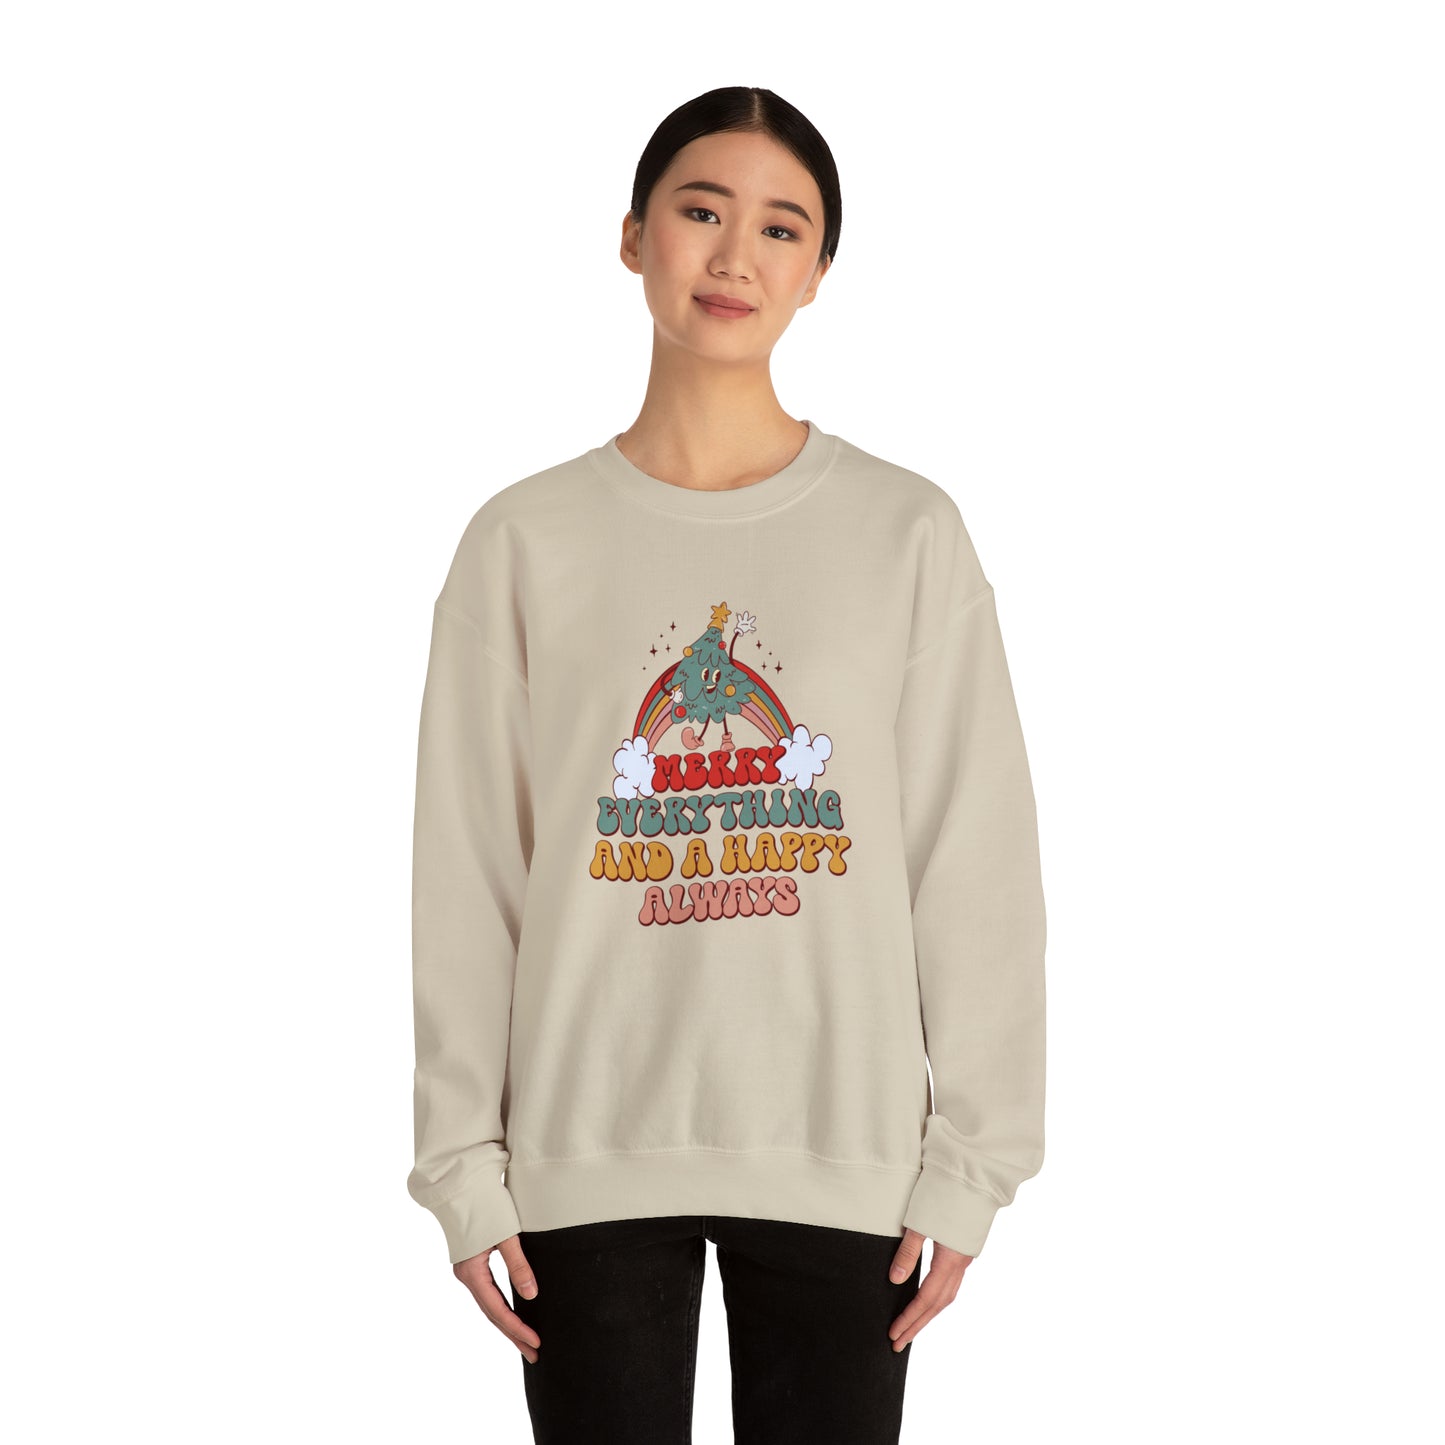 Merry Everything and a Happy Always Christmas Sweatshirt | Matching Christmas Jumpers | Xmas Gift | Christmas Sweater, Fun, Unique, Quirky